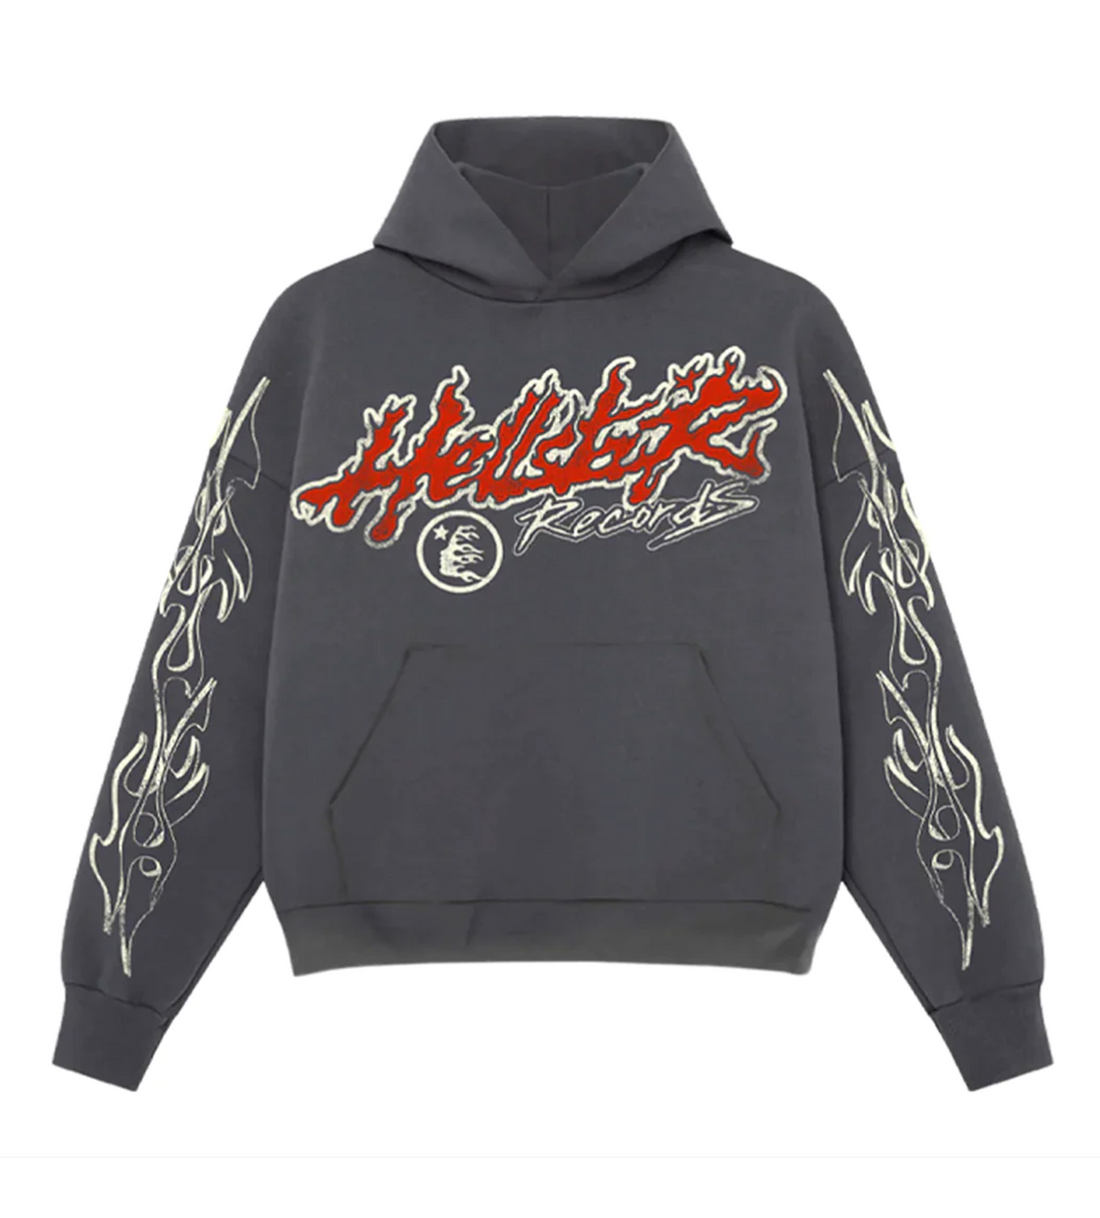 Hellstar Studios Capsule 9.0 Tour Records Faded Black Hoodie, Front View 